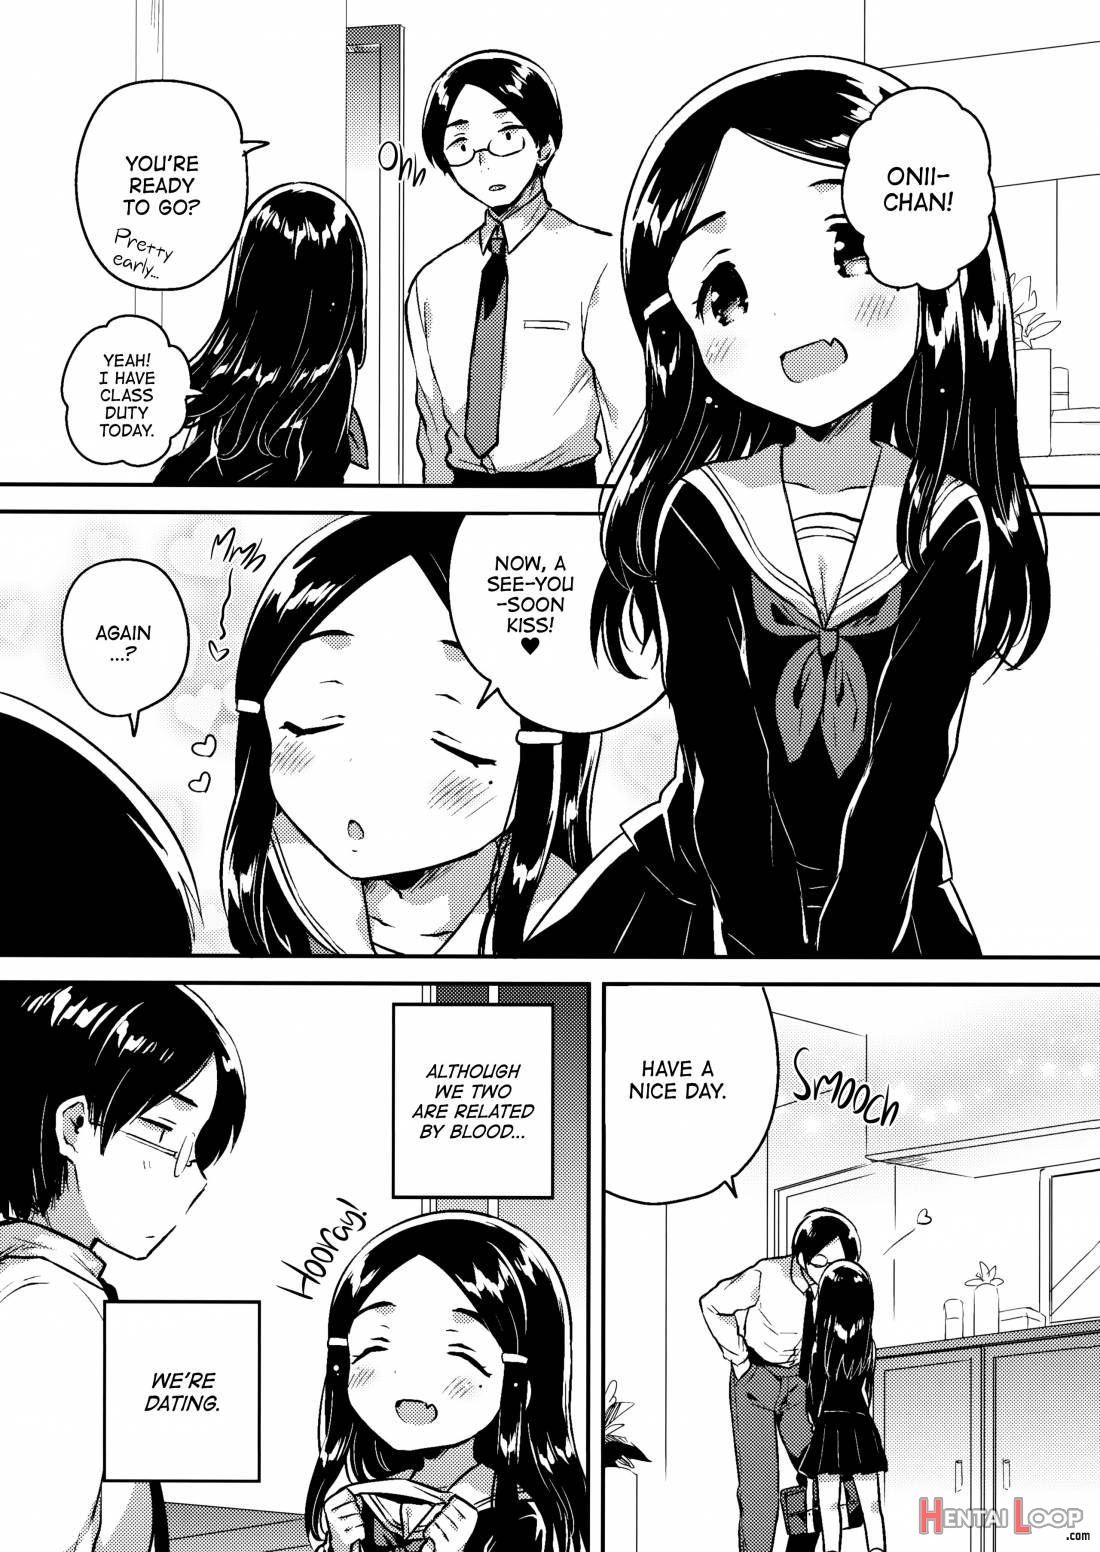 Imouto wa Mistress | My Little Sister Is My Mistress <First Chapter> page 2